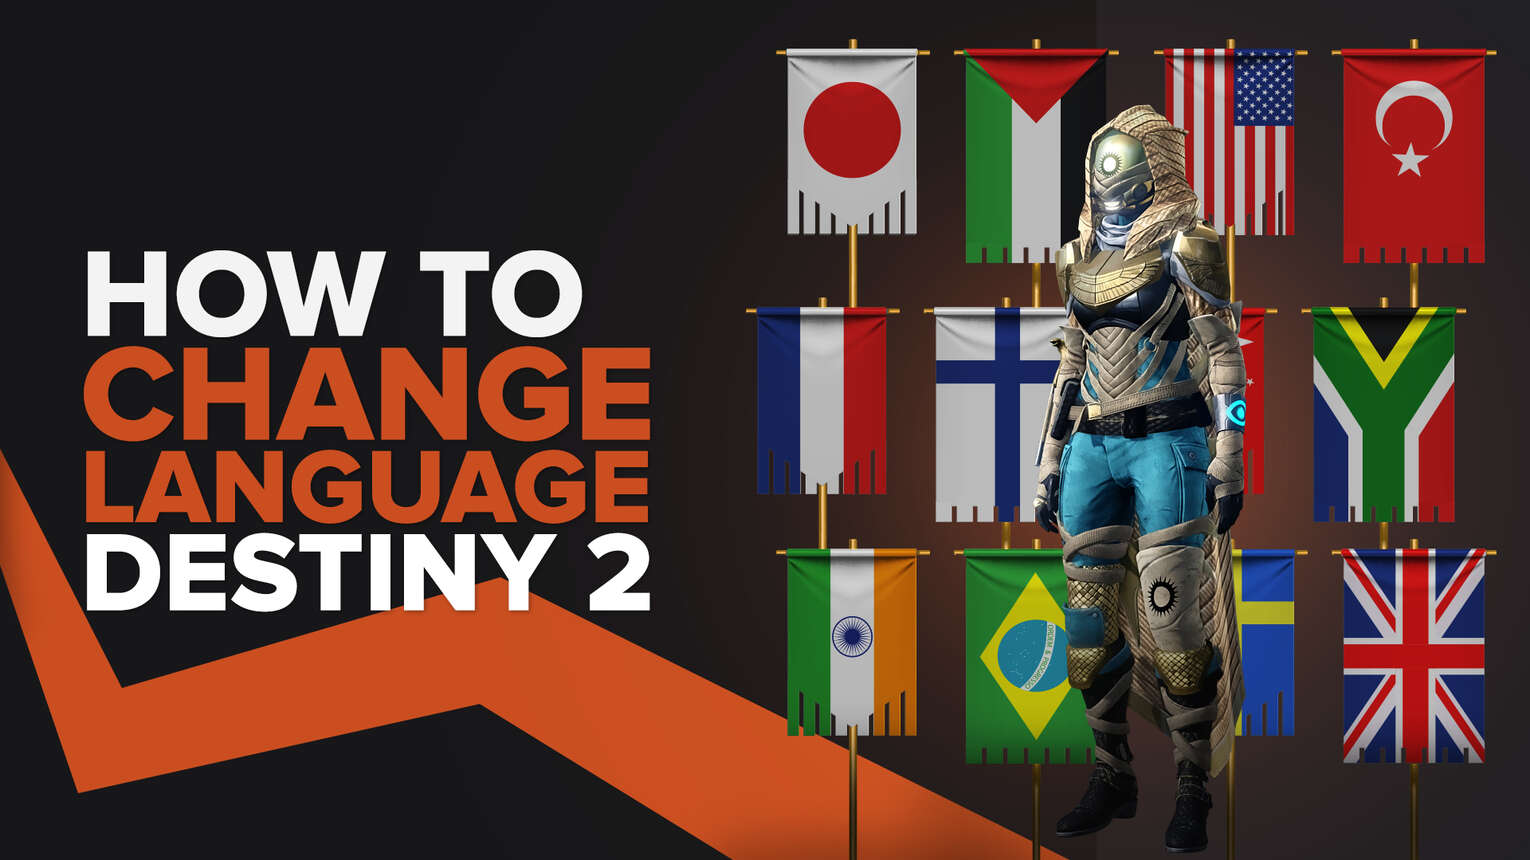 How To Change Language in Destiny 2 Quickly